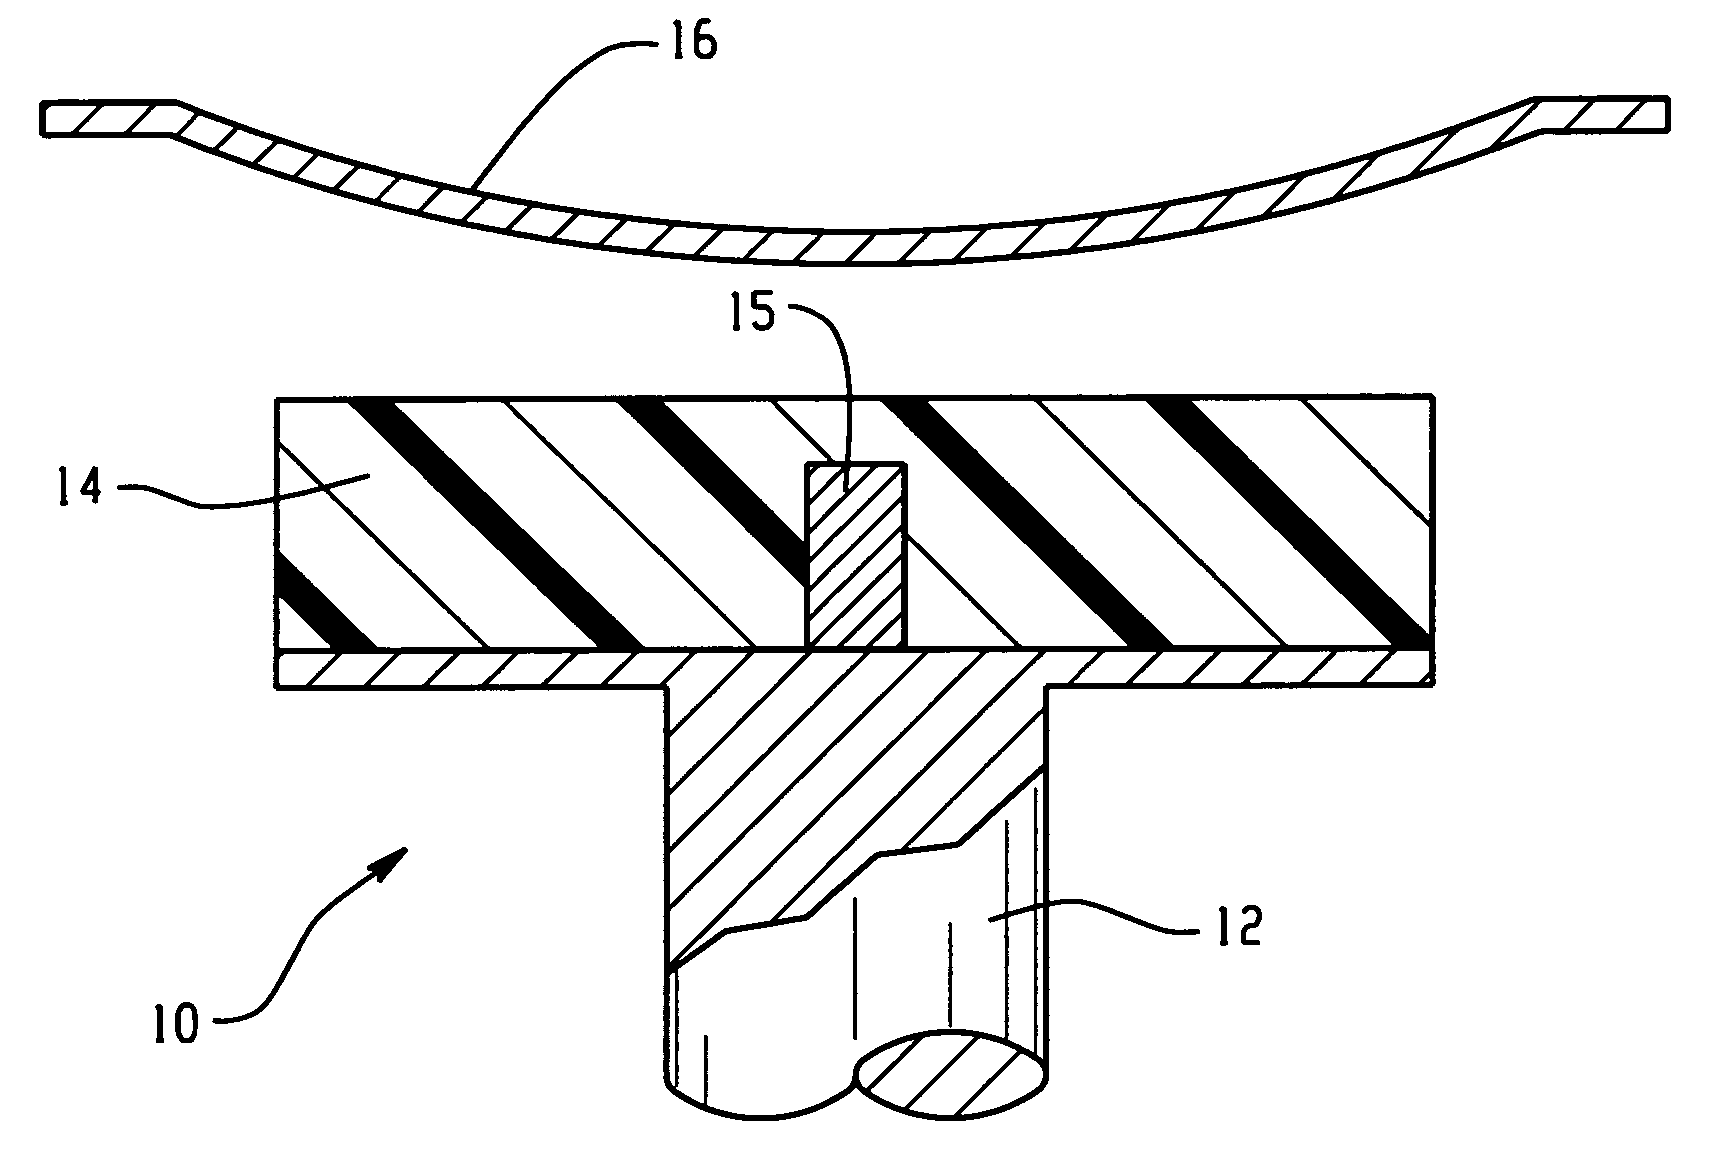 Reconfigurable fixture device and methods of use